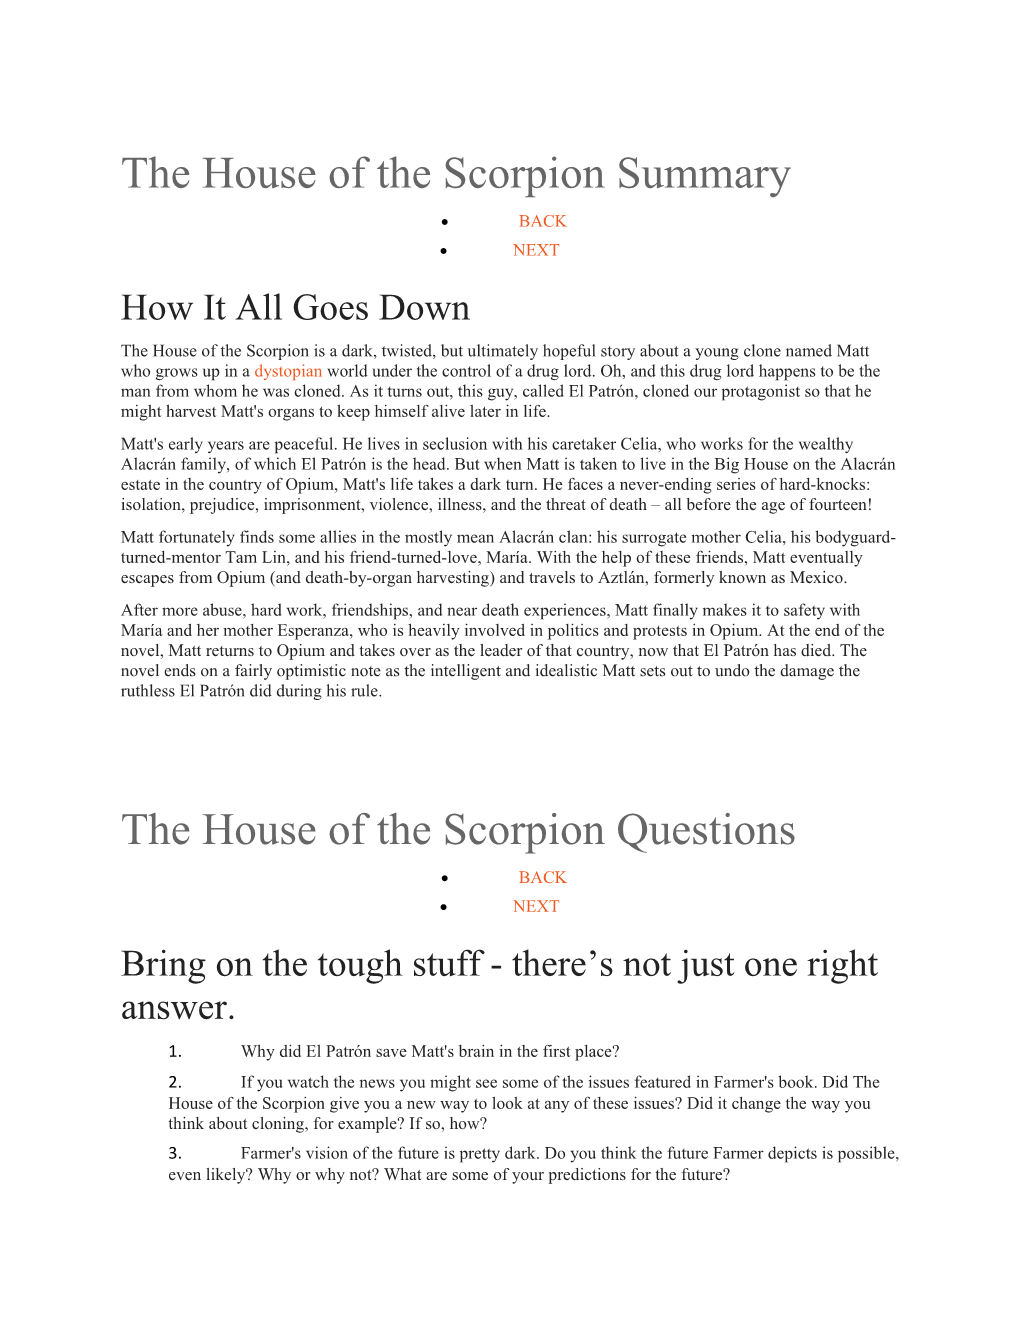 The House of the Scorpion Summary